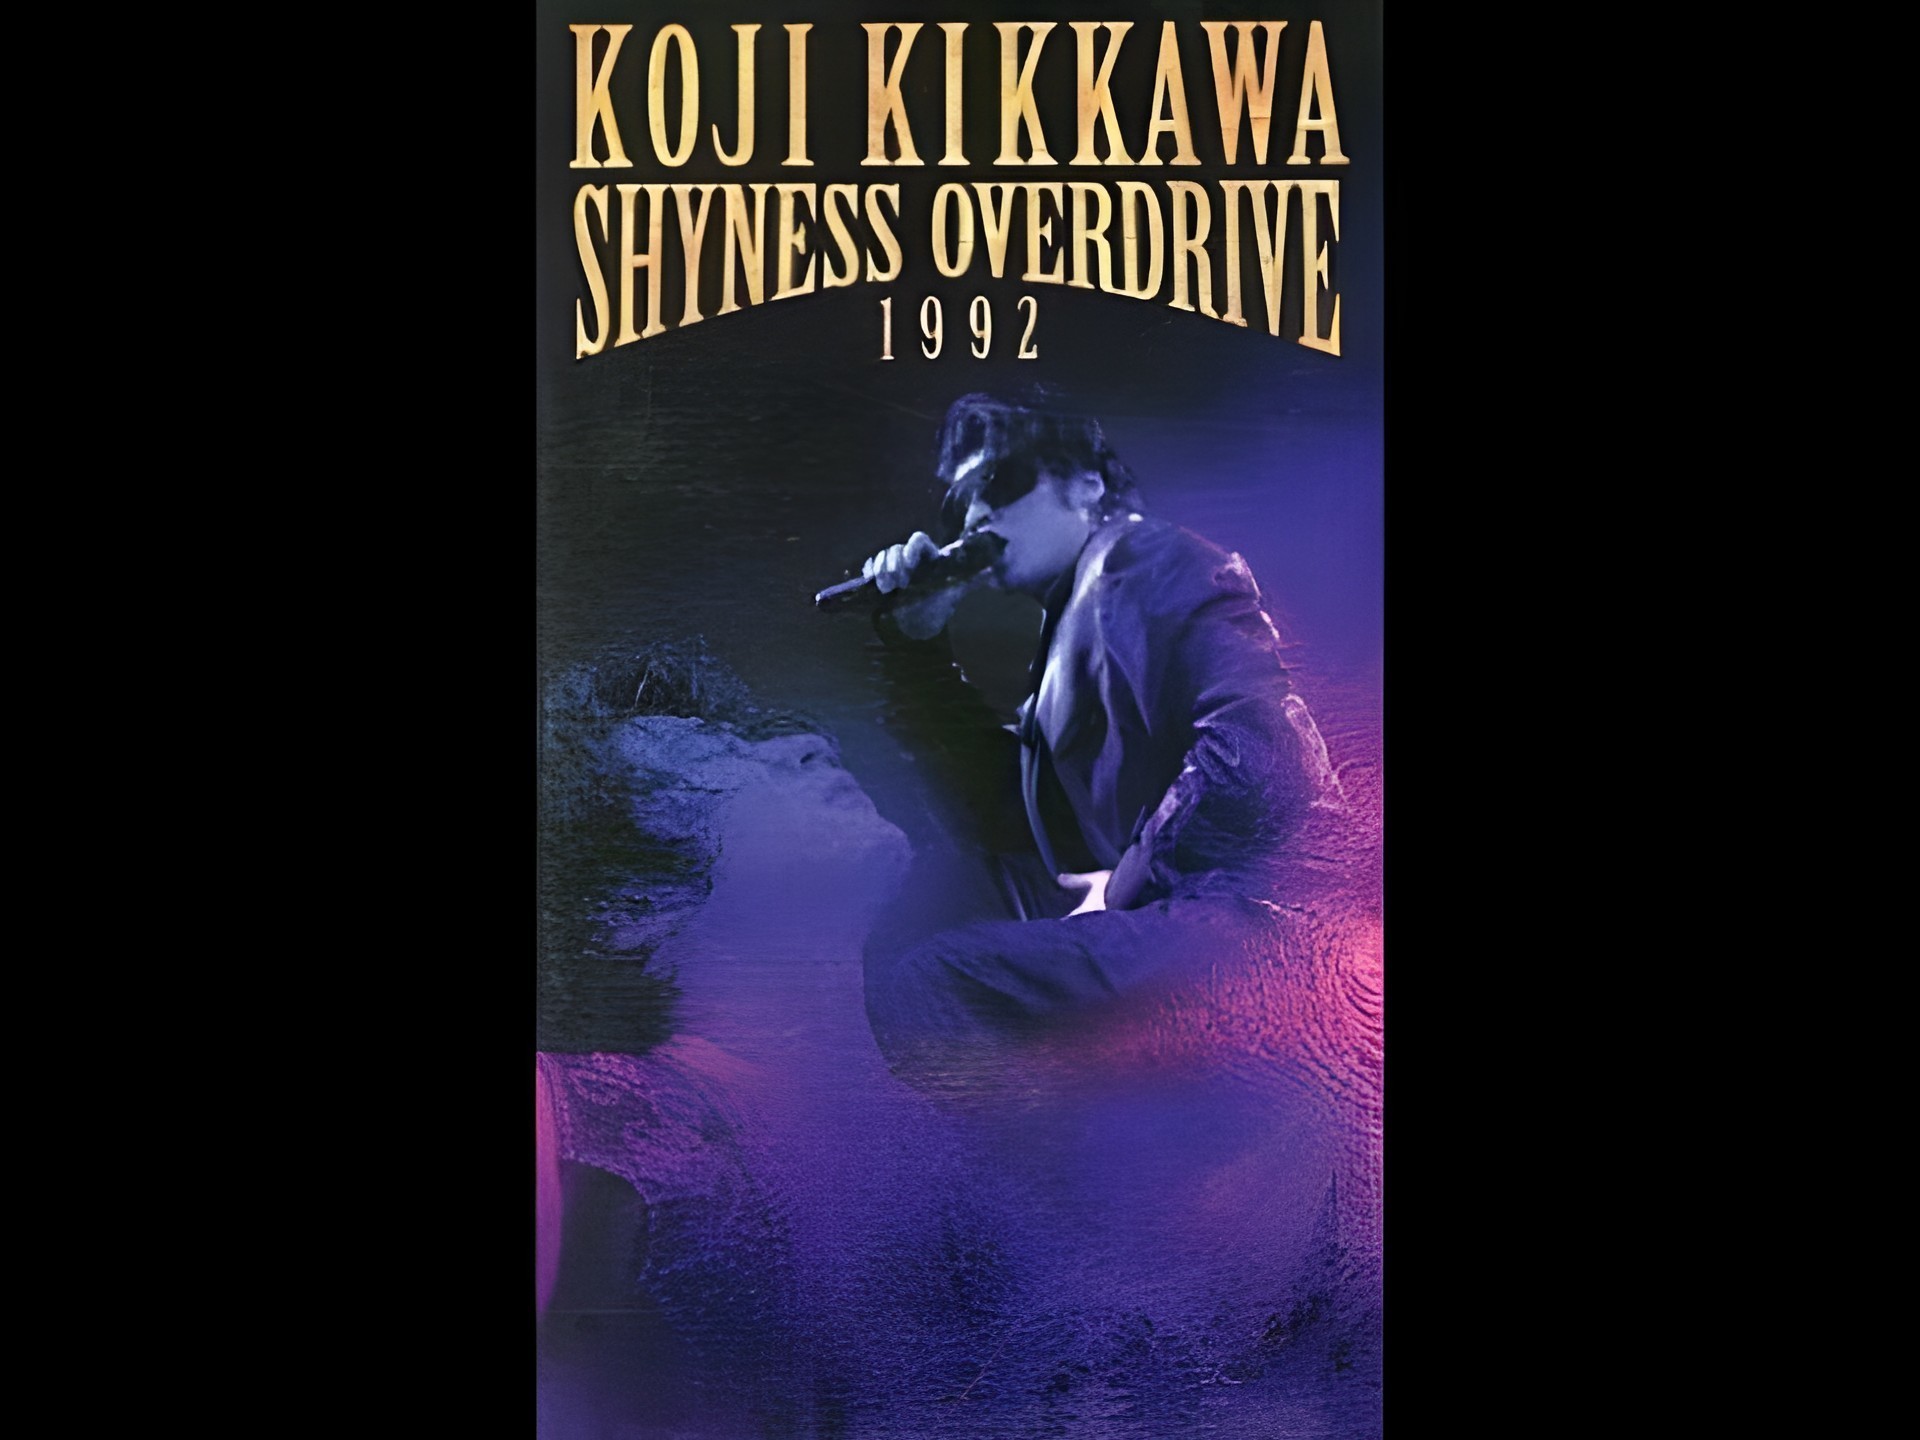 10412_live_shyness_overdrive_1992_